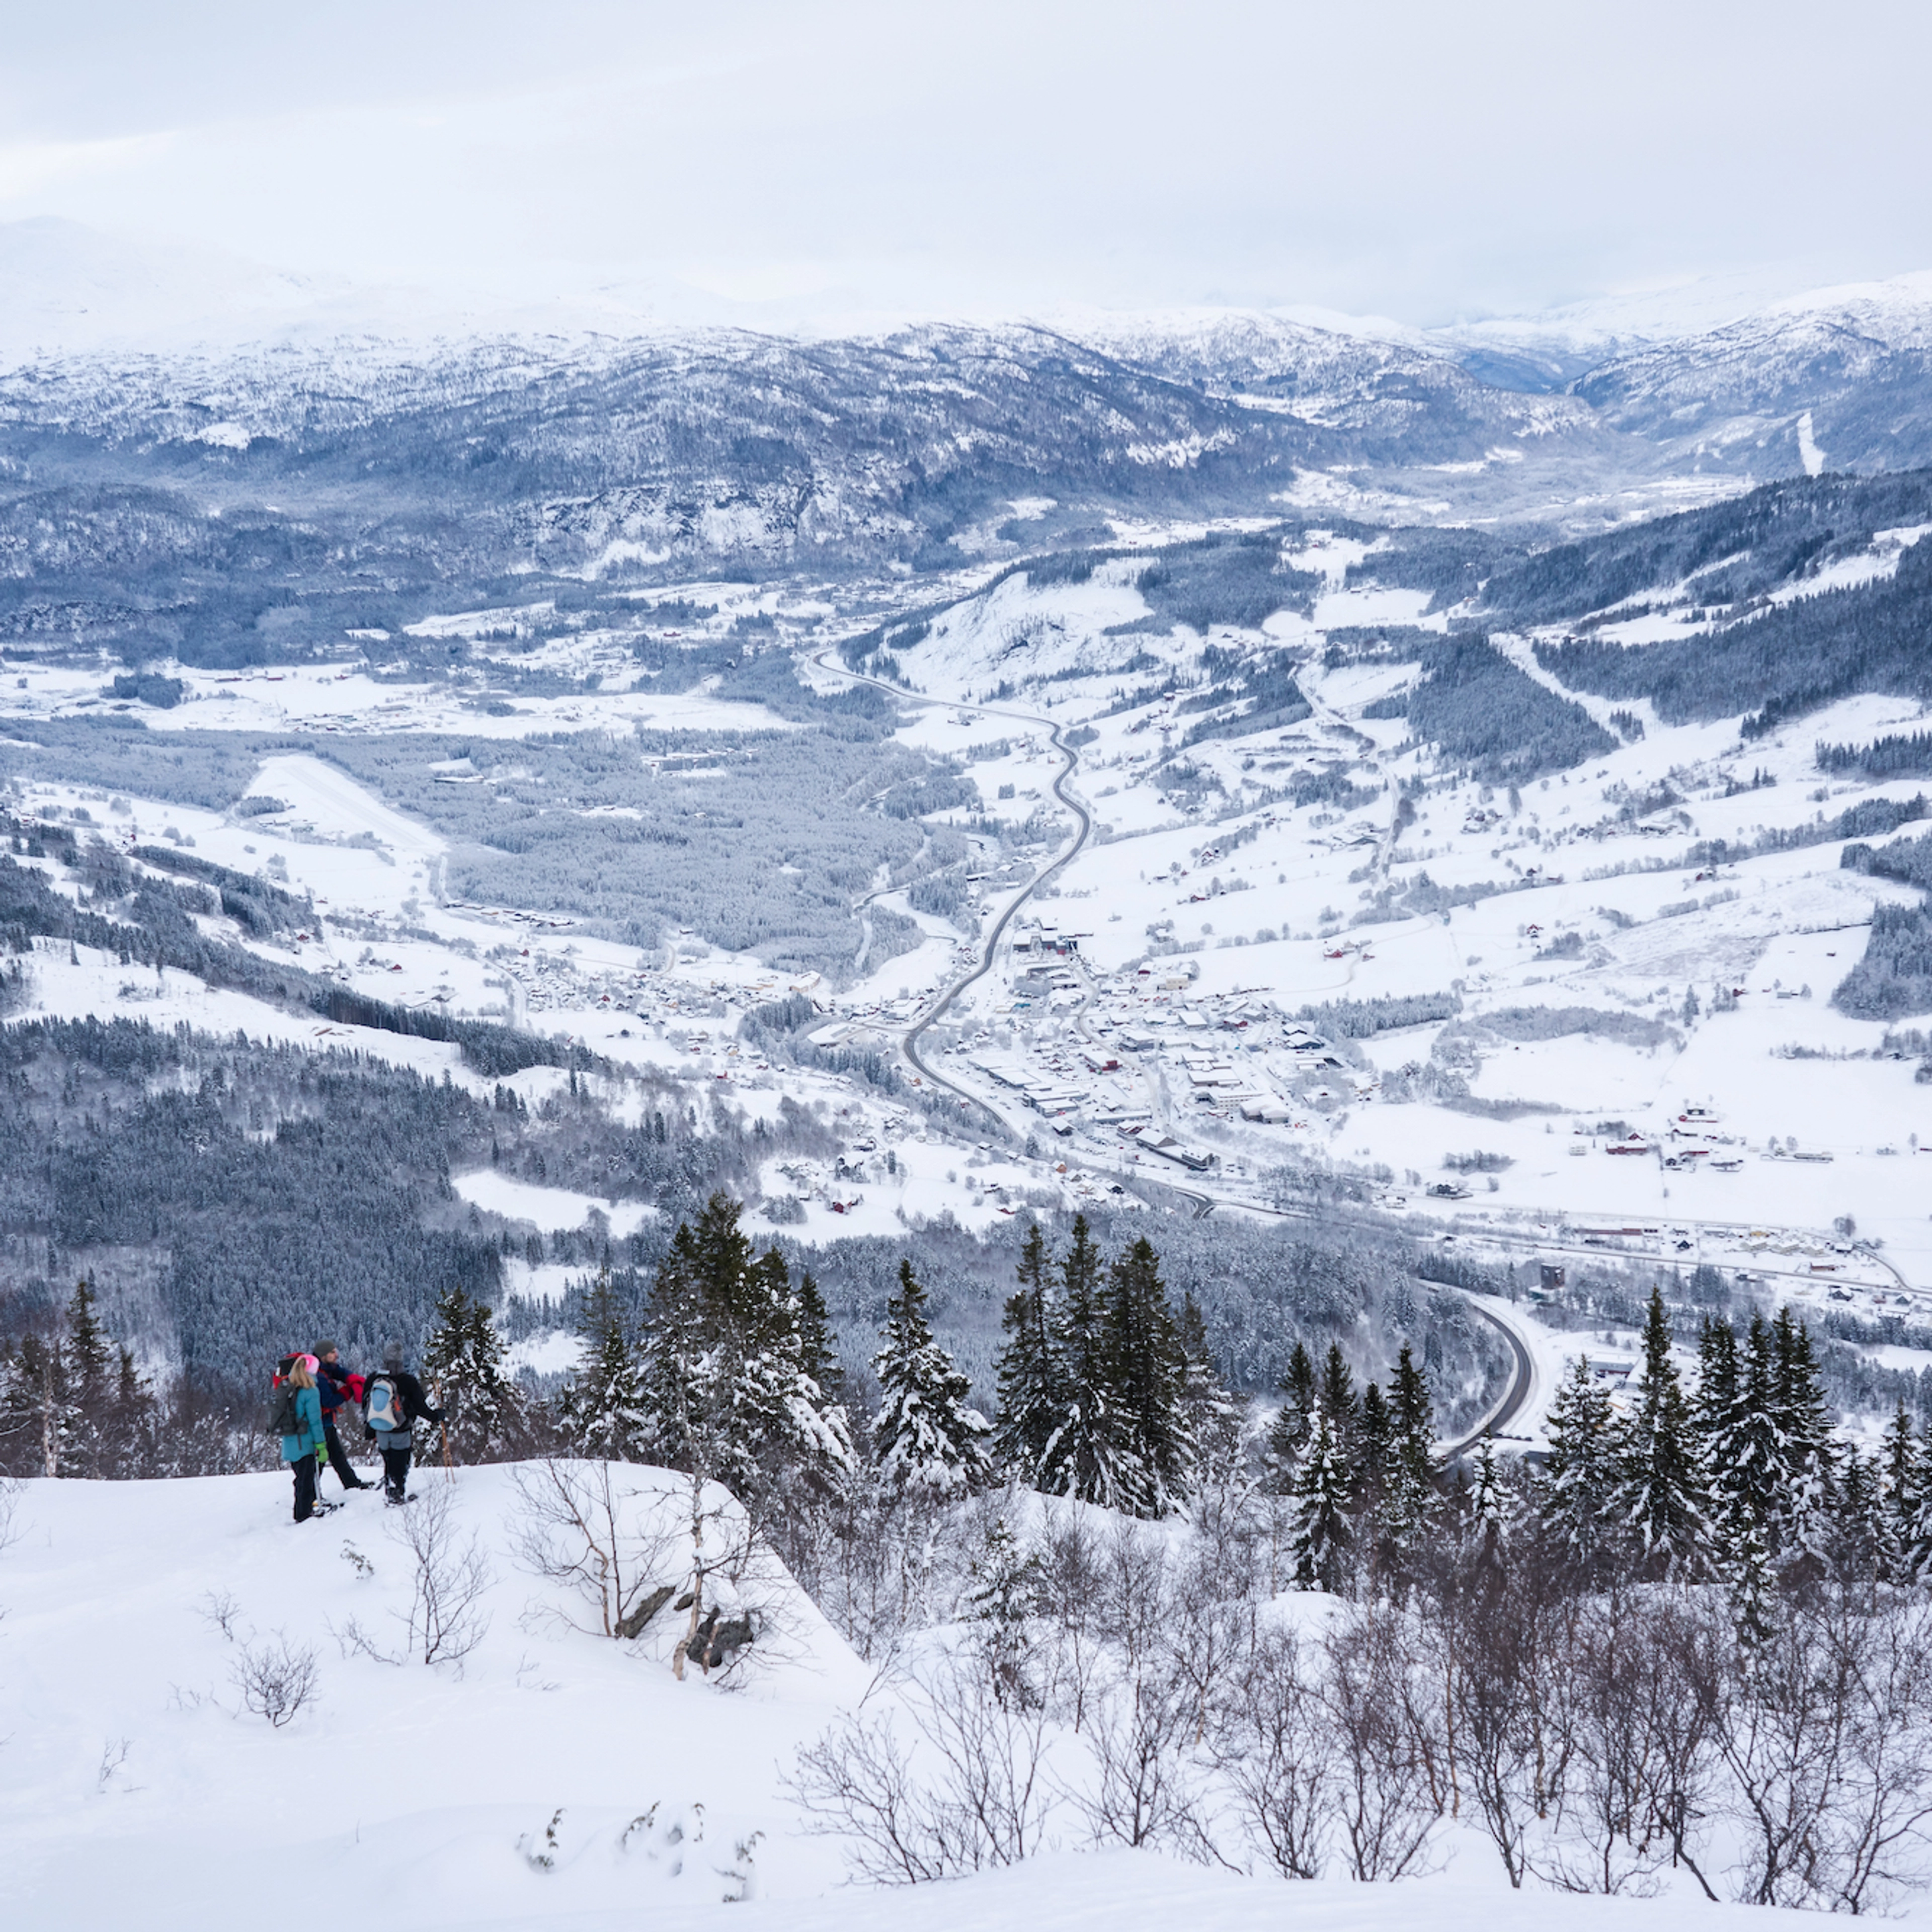 Snowshoe hike with a view - Voss, Norway